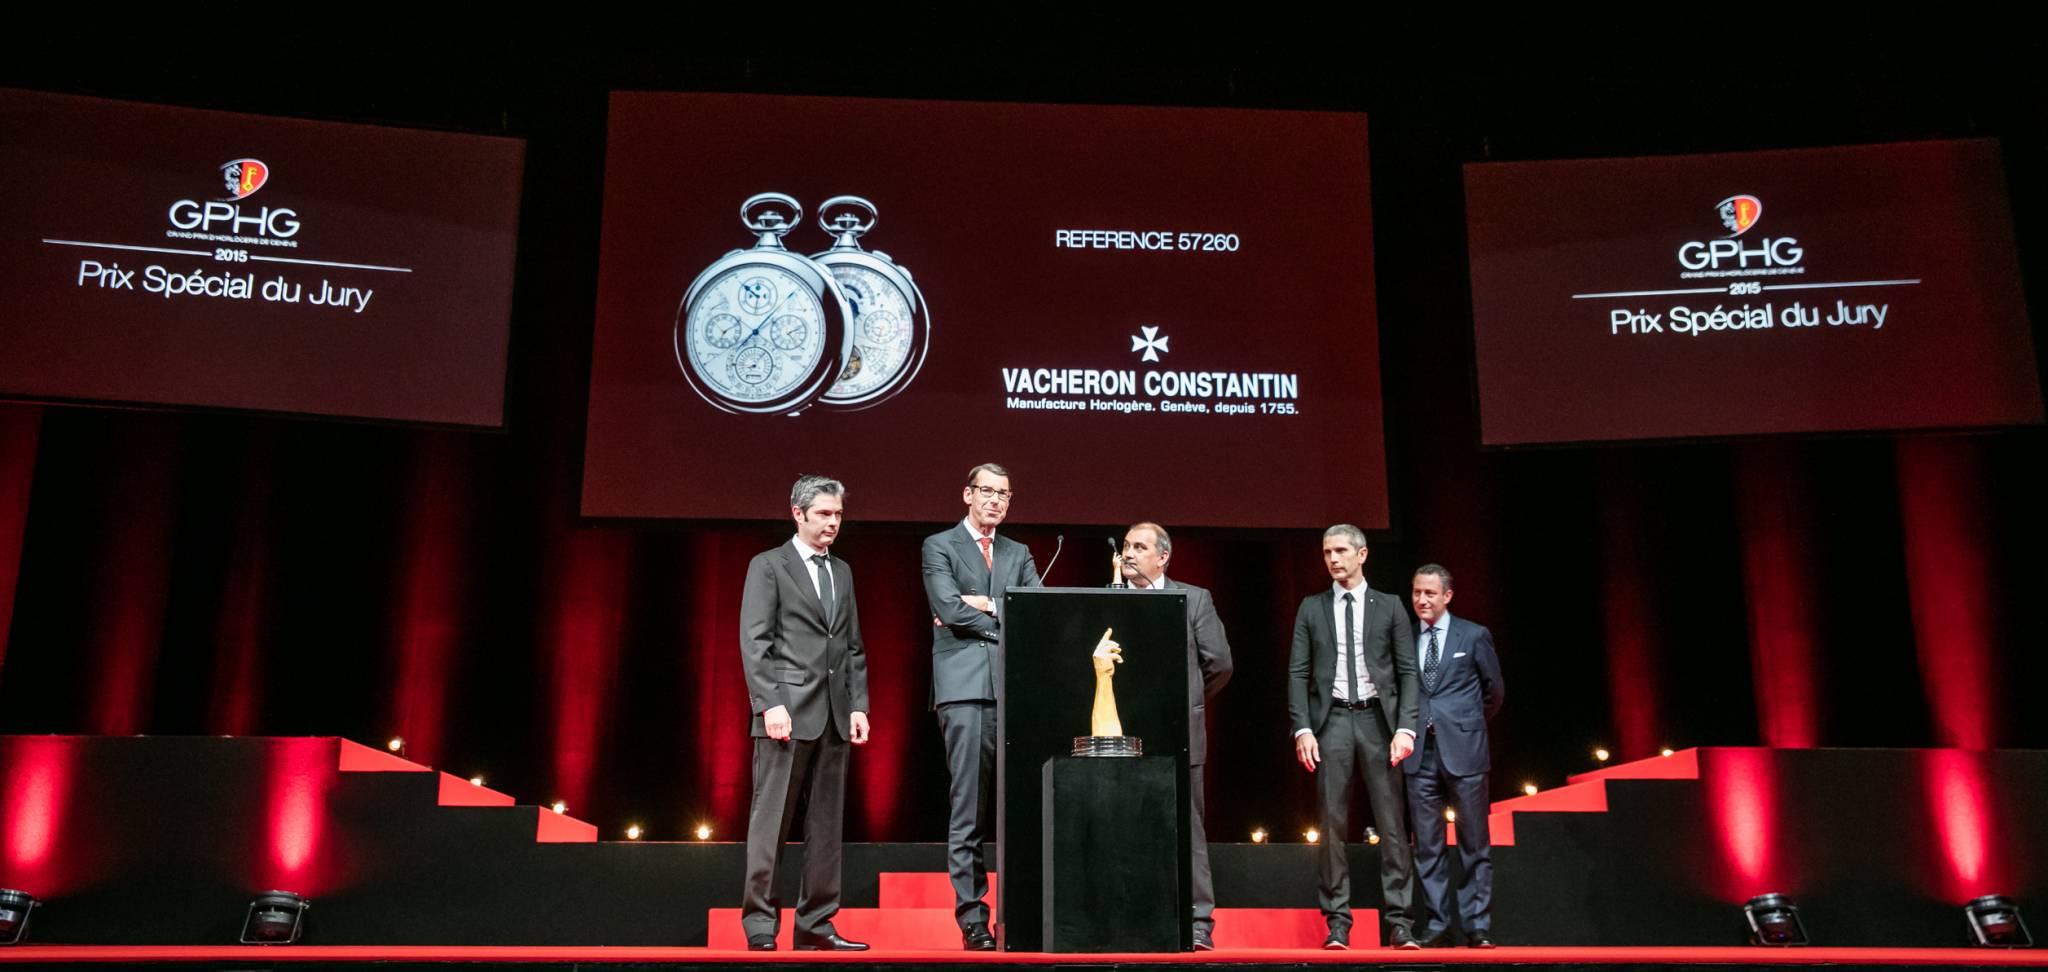 Micke Pintus, Yannick Pintus, Jean-Luc Perrin (watchmakers of Vacheron Constantin), pictured with Christian Selmoni (Artistic director of Vacheron Constantin, winner of the Special Jury Prize) and Aurel Bacs (President of the jury)